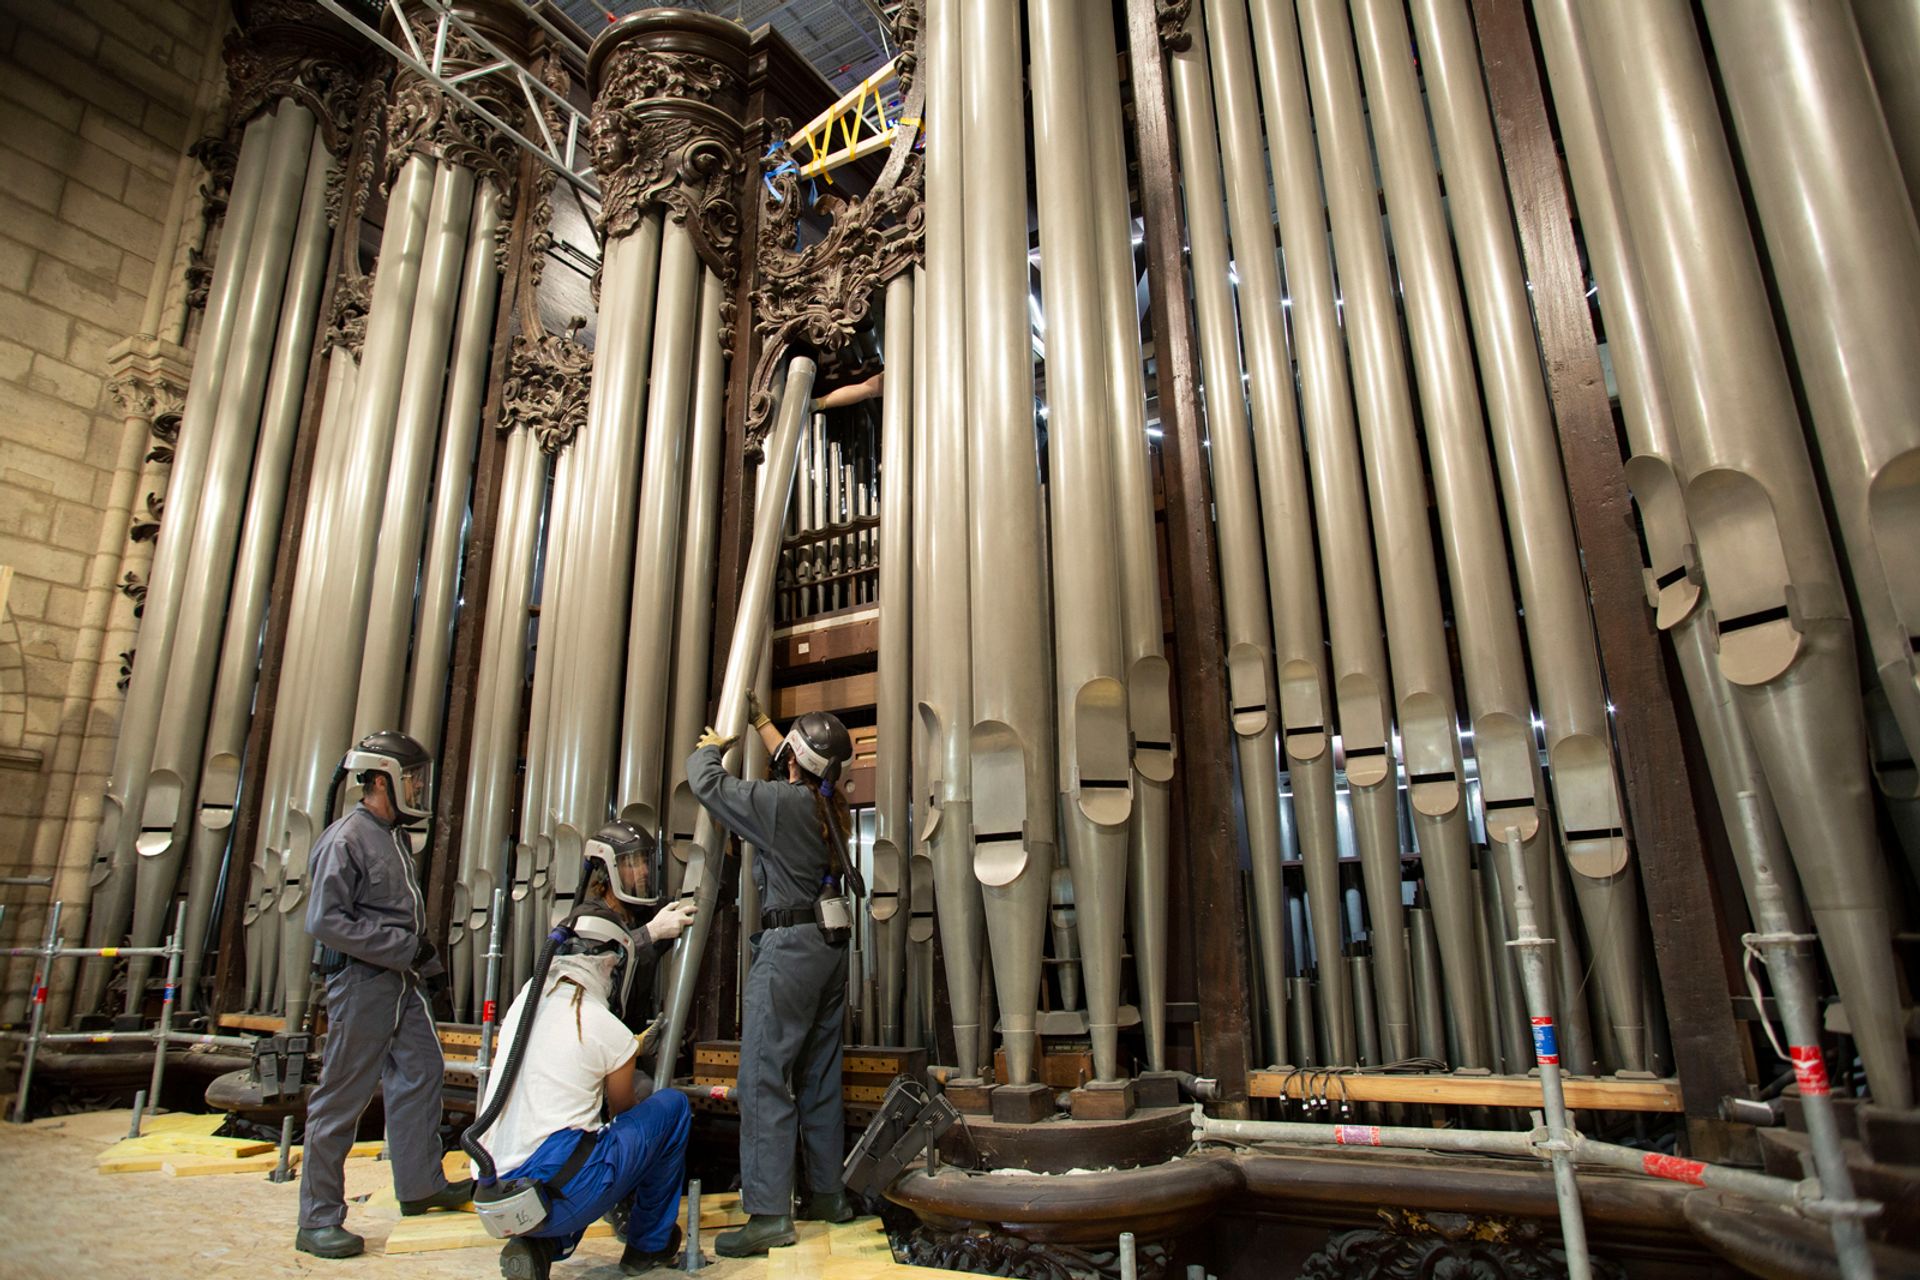 The organ contains 8,000 pipes © Patrick Zachmann